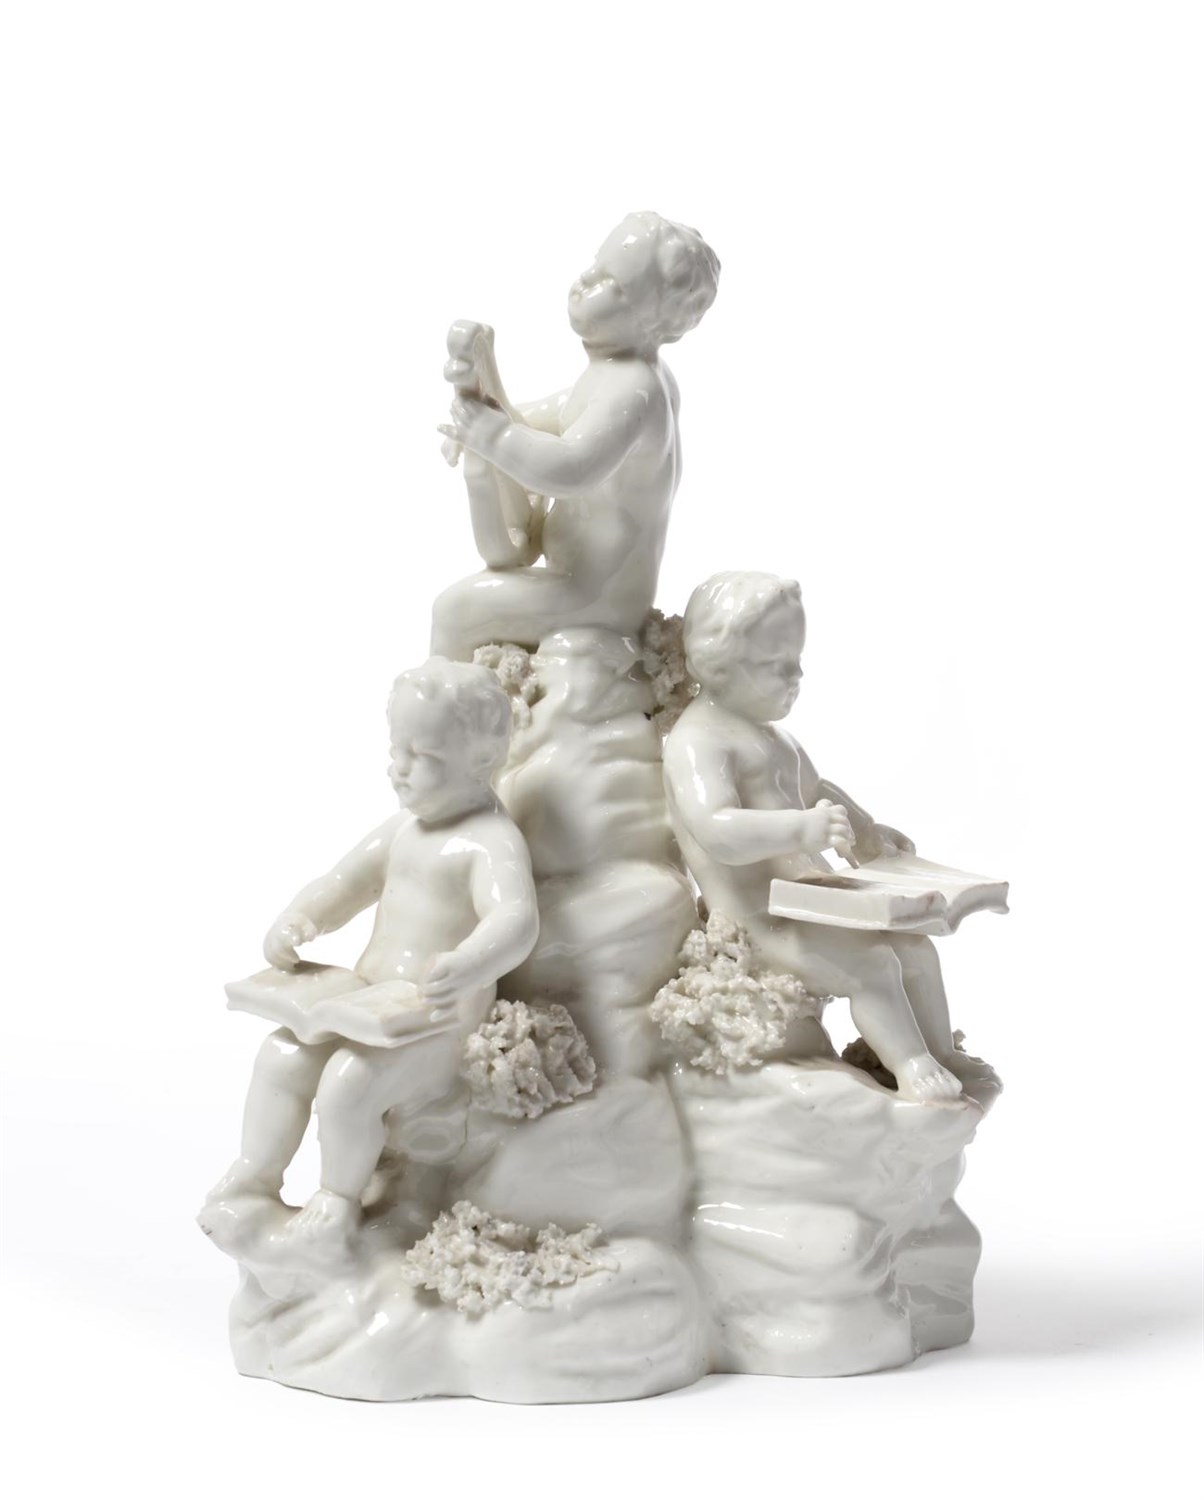 Lot 52 - A Continental White Porcelain Figure Group, possibly Italian, circa 1770, as four putti playing...